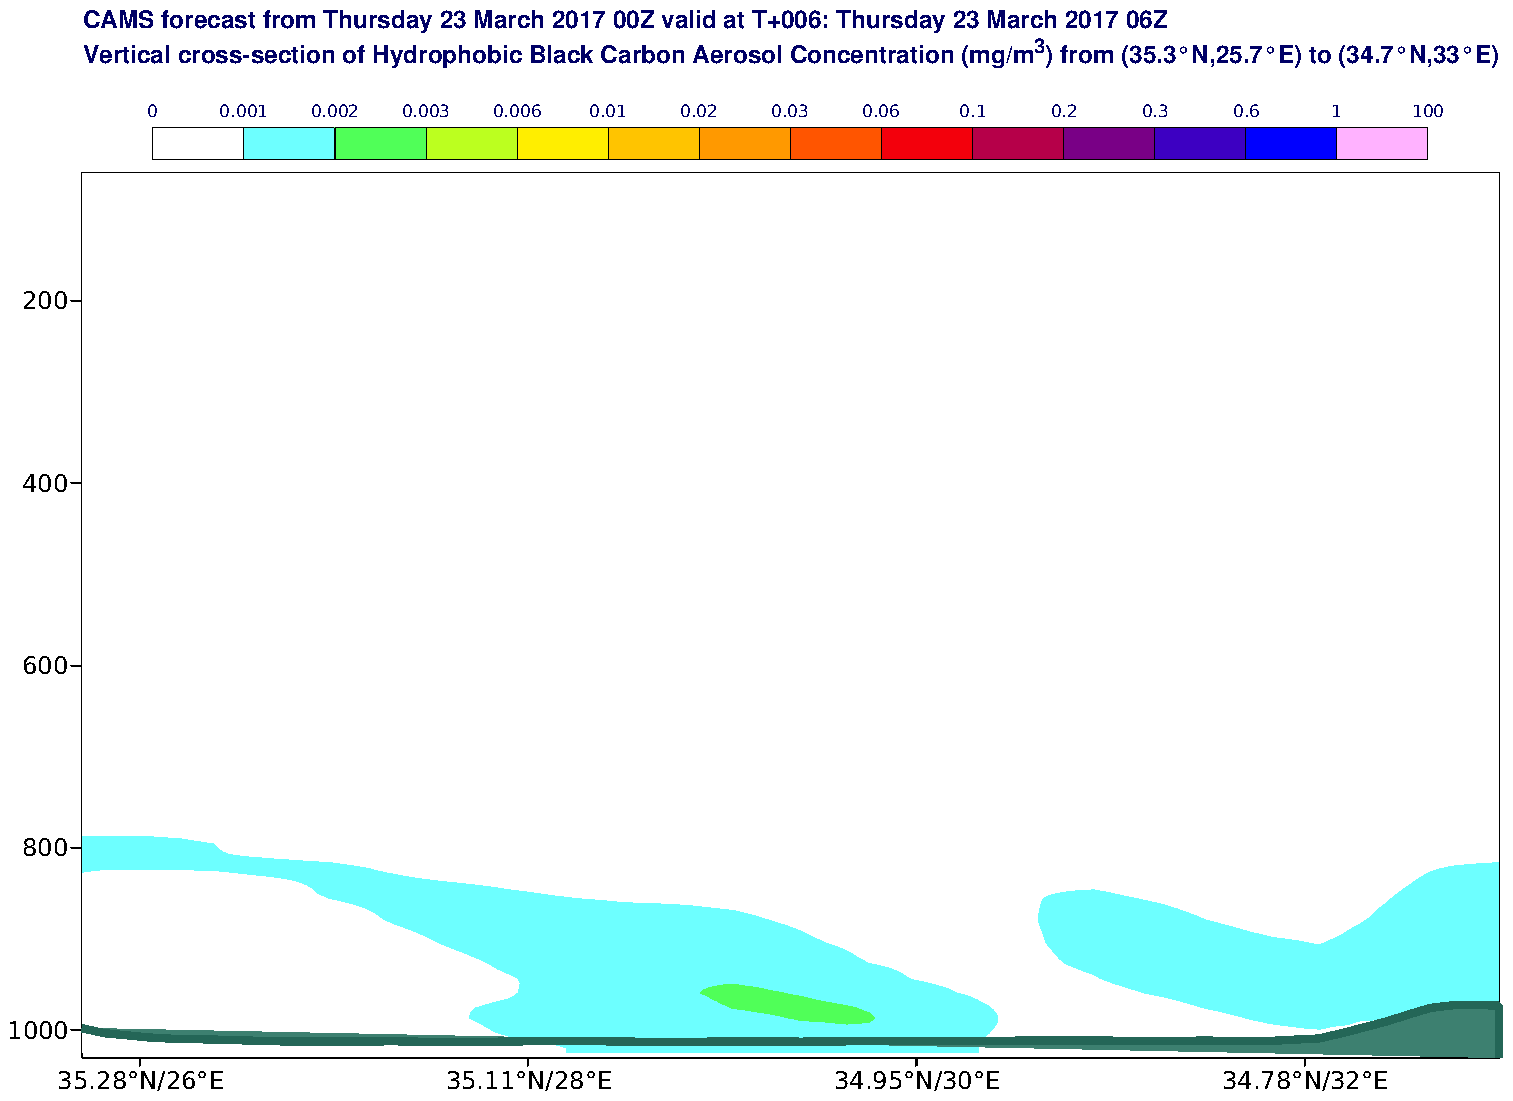 Vertical cross-section of Hydrophobic Black Carbon Aerosol Concentration (mg/m3) valid at T6 - 2017-03-23 06:00